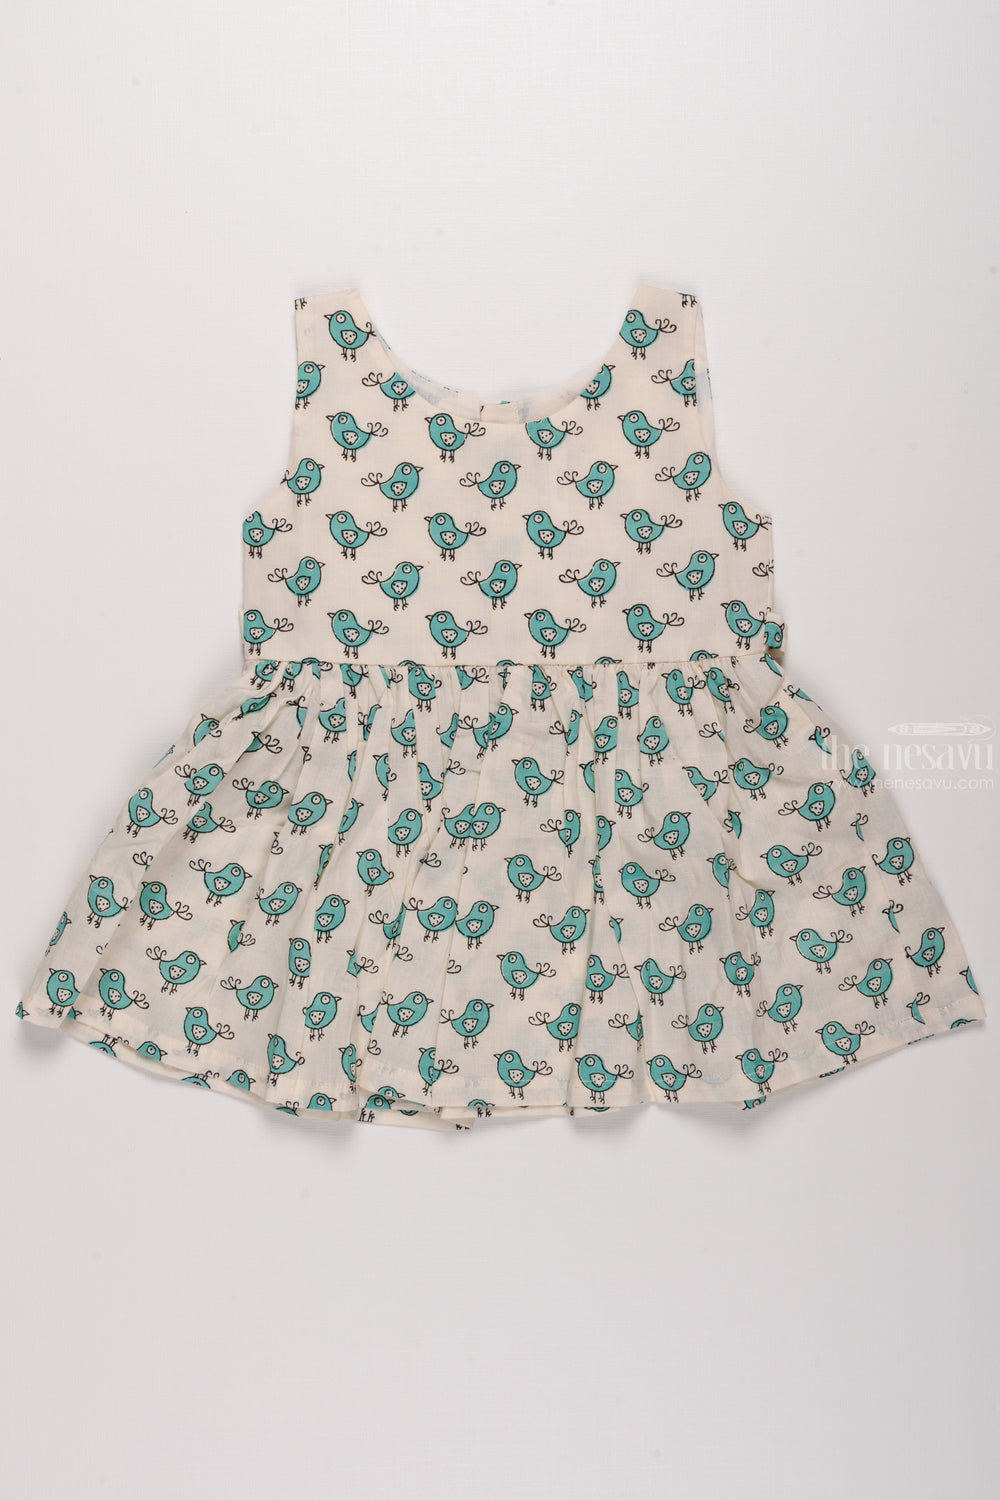 The Nesavu Baby Cotton Frocks Tweeting Tales: Charming Bird-Printed Baby Cotton Frock Nesavu 12 (3M) / White / Cotton BFJ491A-12 Stylish Baby Frock Designs | Trendsetting Dresses for Little Ones | The Nesavu